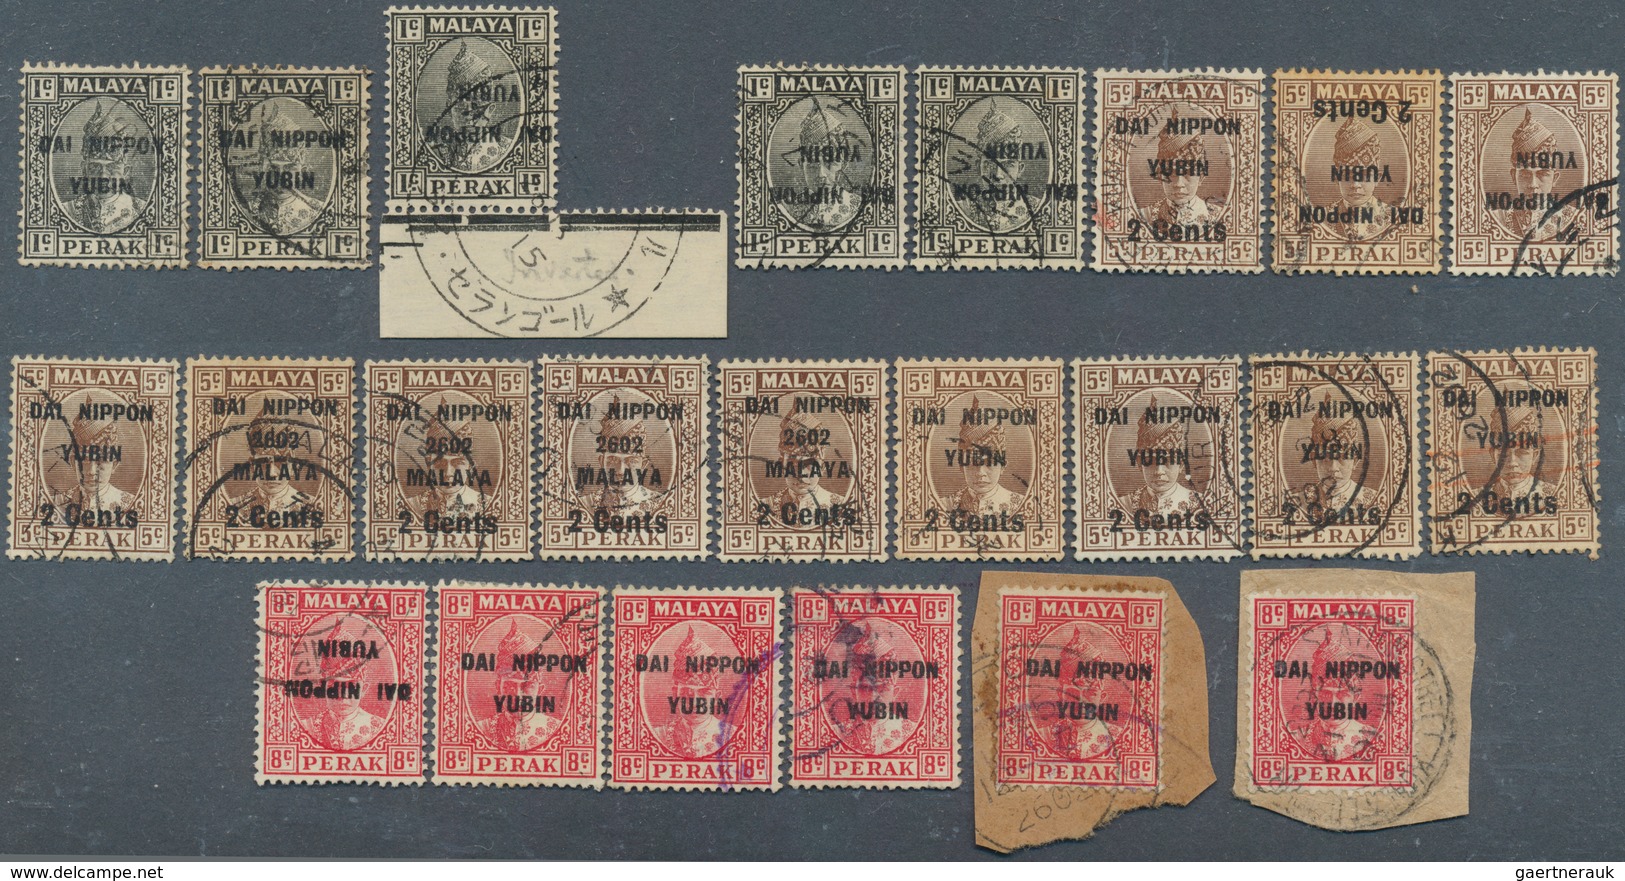 22941 Japanische Besetzung  WK II - Malaya: General Issues, Perak, 1942, Ovpt. T17 Used Inc. Inverts On 1 - Malaysia (1964-...)